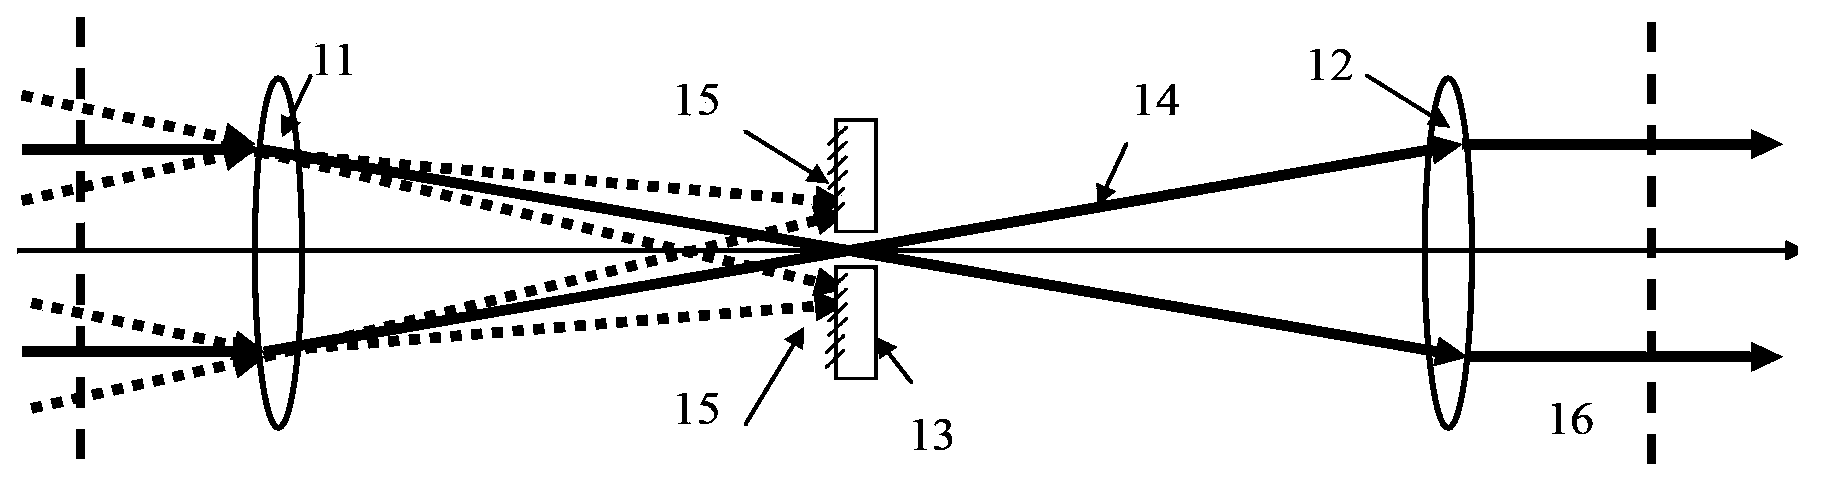 High-power laser image transfer low-pass spatial filter device